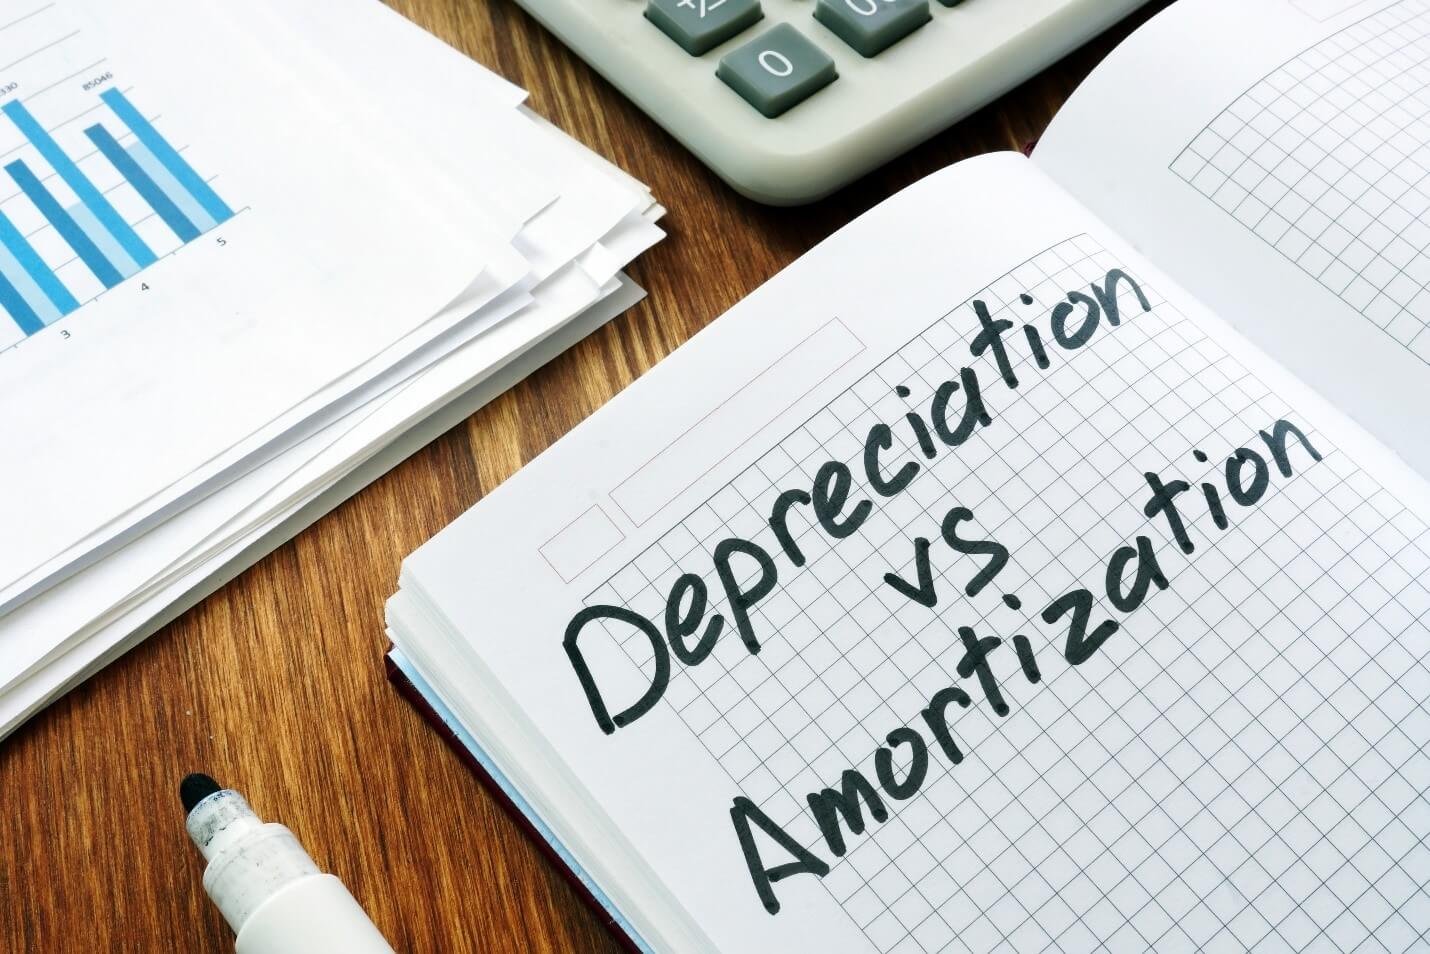  Depreciation and Amortization: What’s the difference?